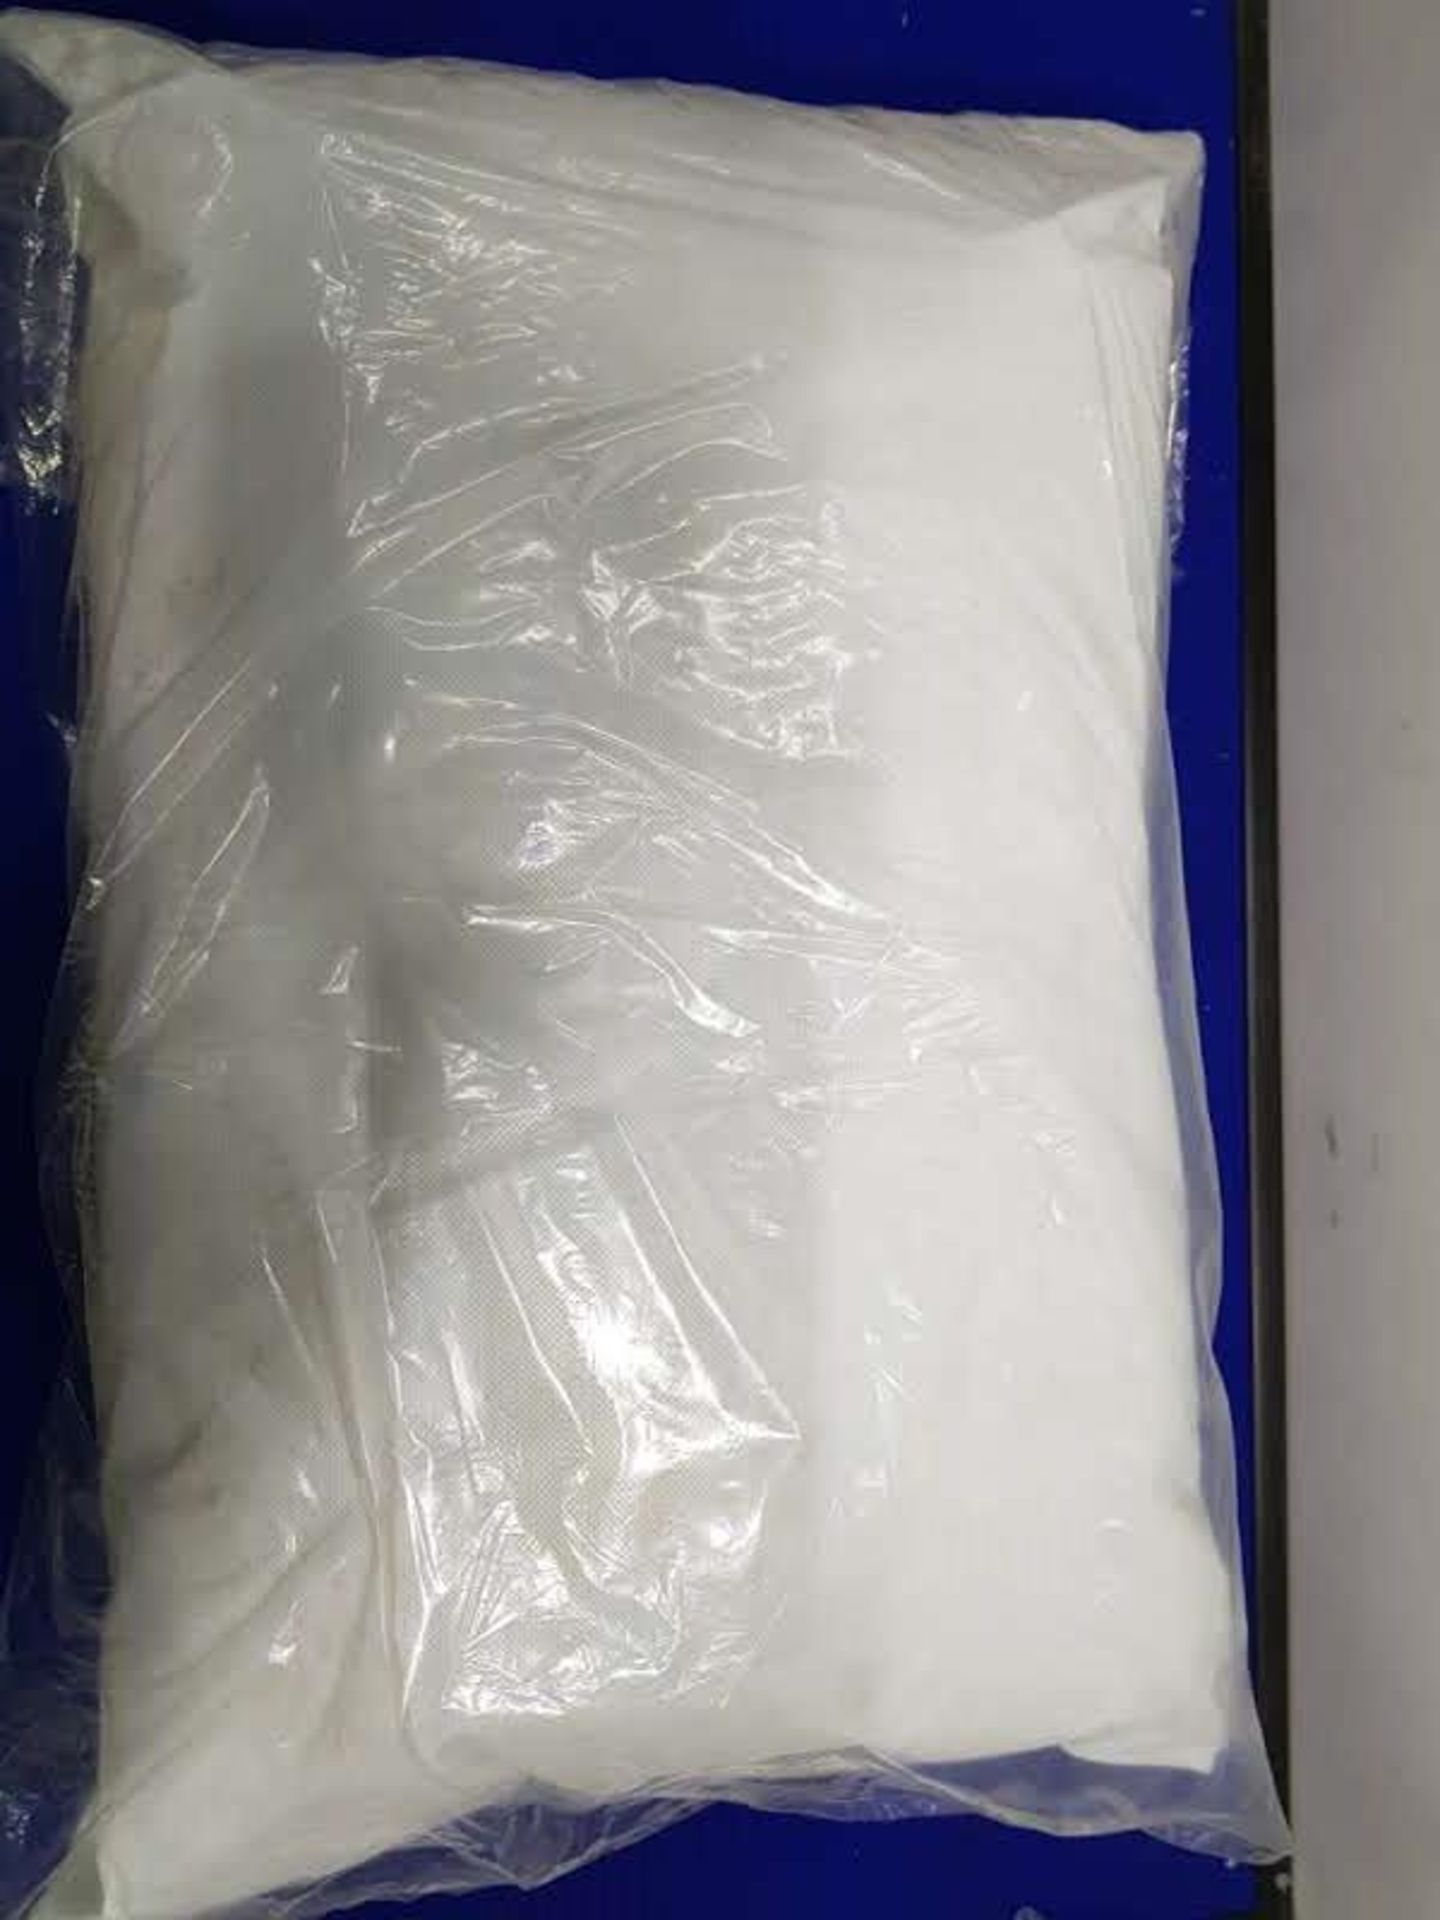 Waterproof And Wipeclean Pillow - Image 2 of 2